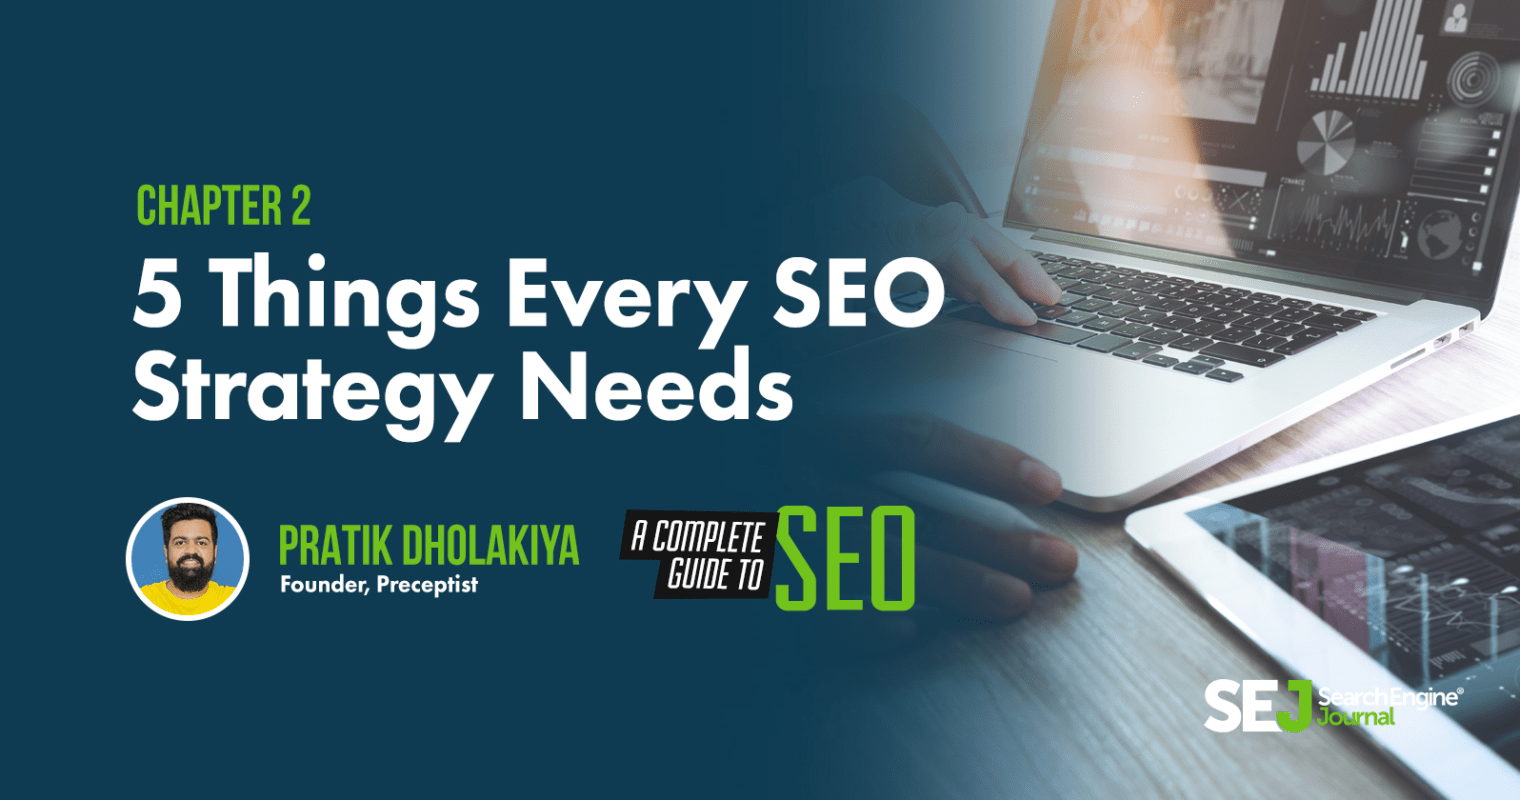 5-things-every-seo-strategy-needs-1520x800.png